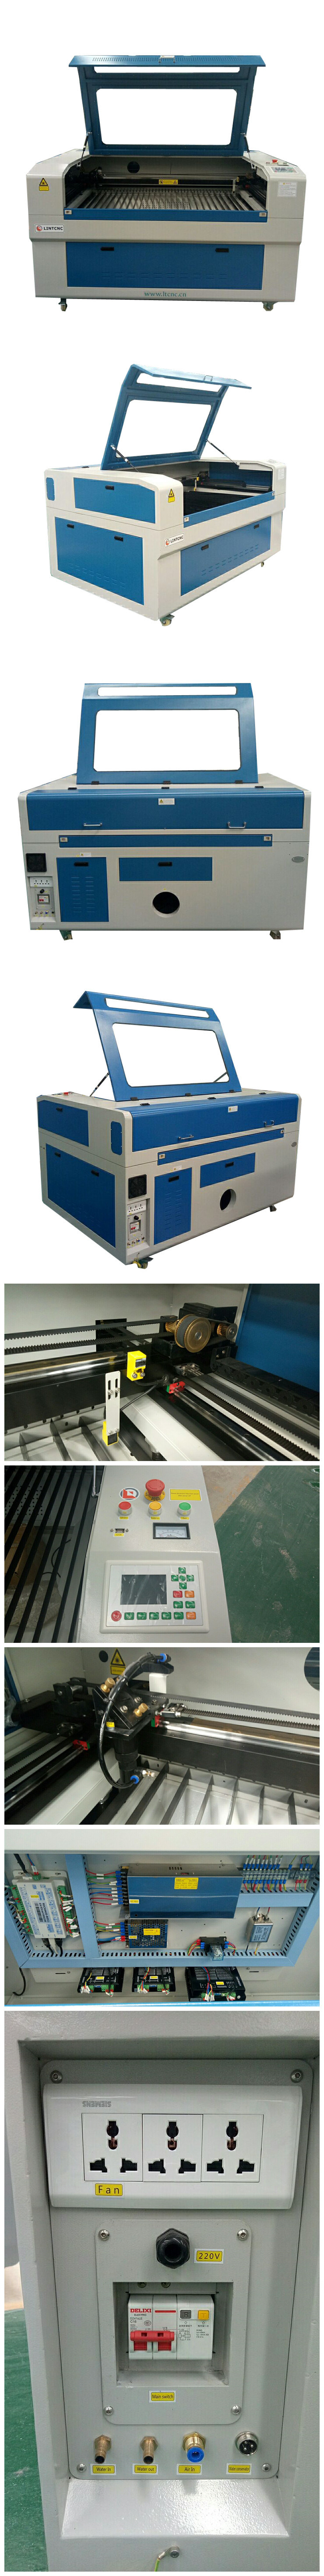 Auto Feeding 3D CO2 Laser Cutter Engraving Machine for Fabric Rubber Plywood Glass Acrylic CNC Laser Cutting Machine